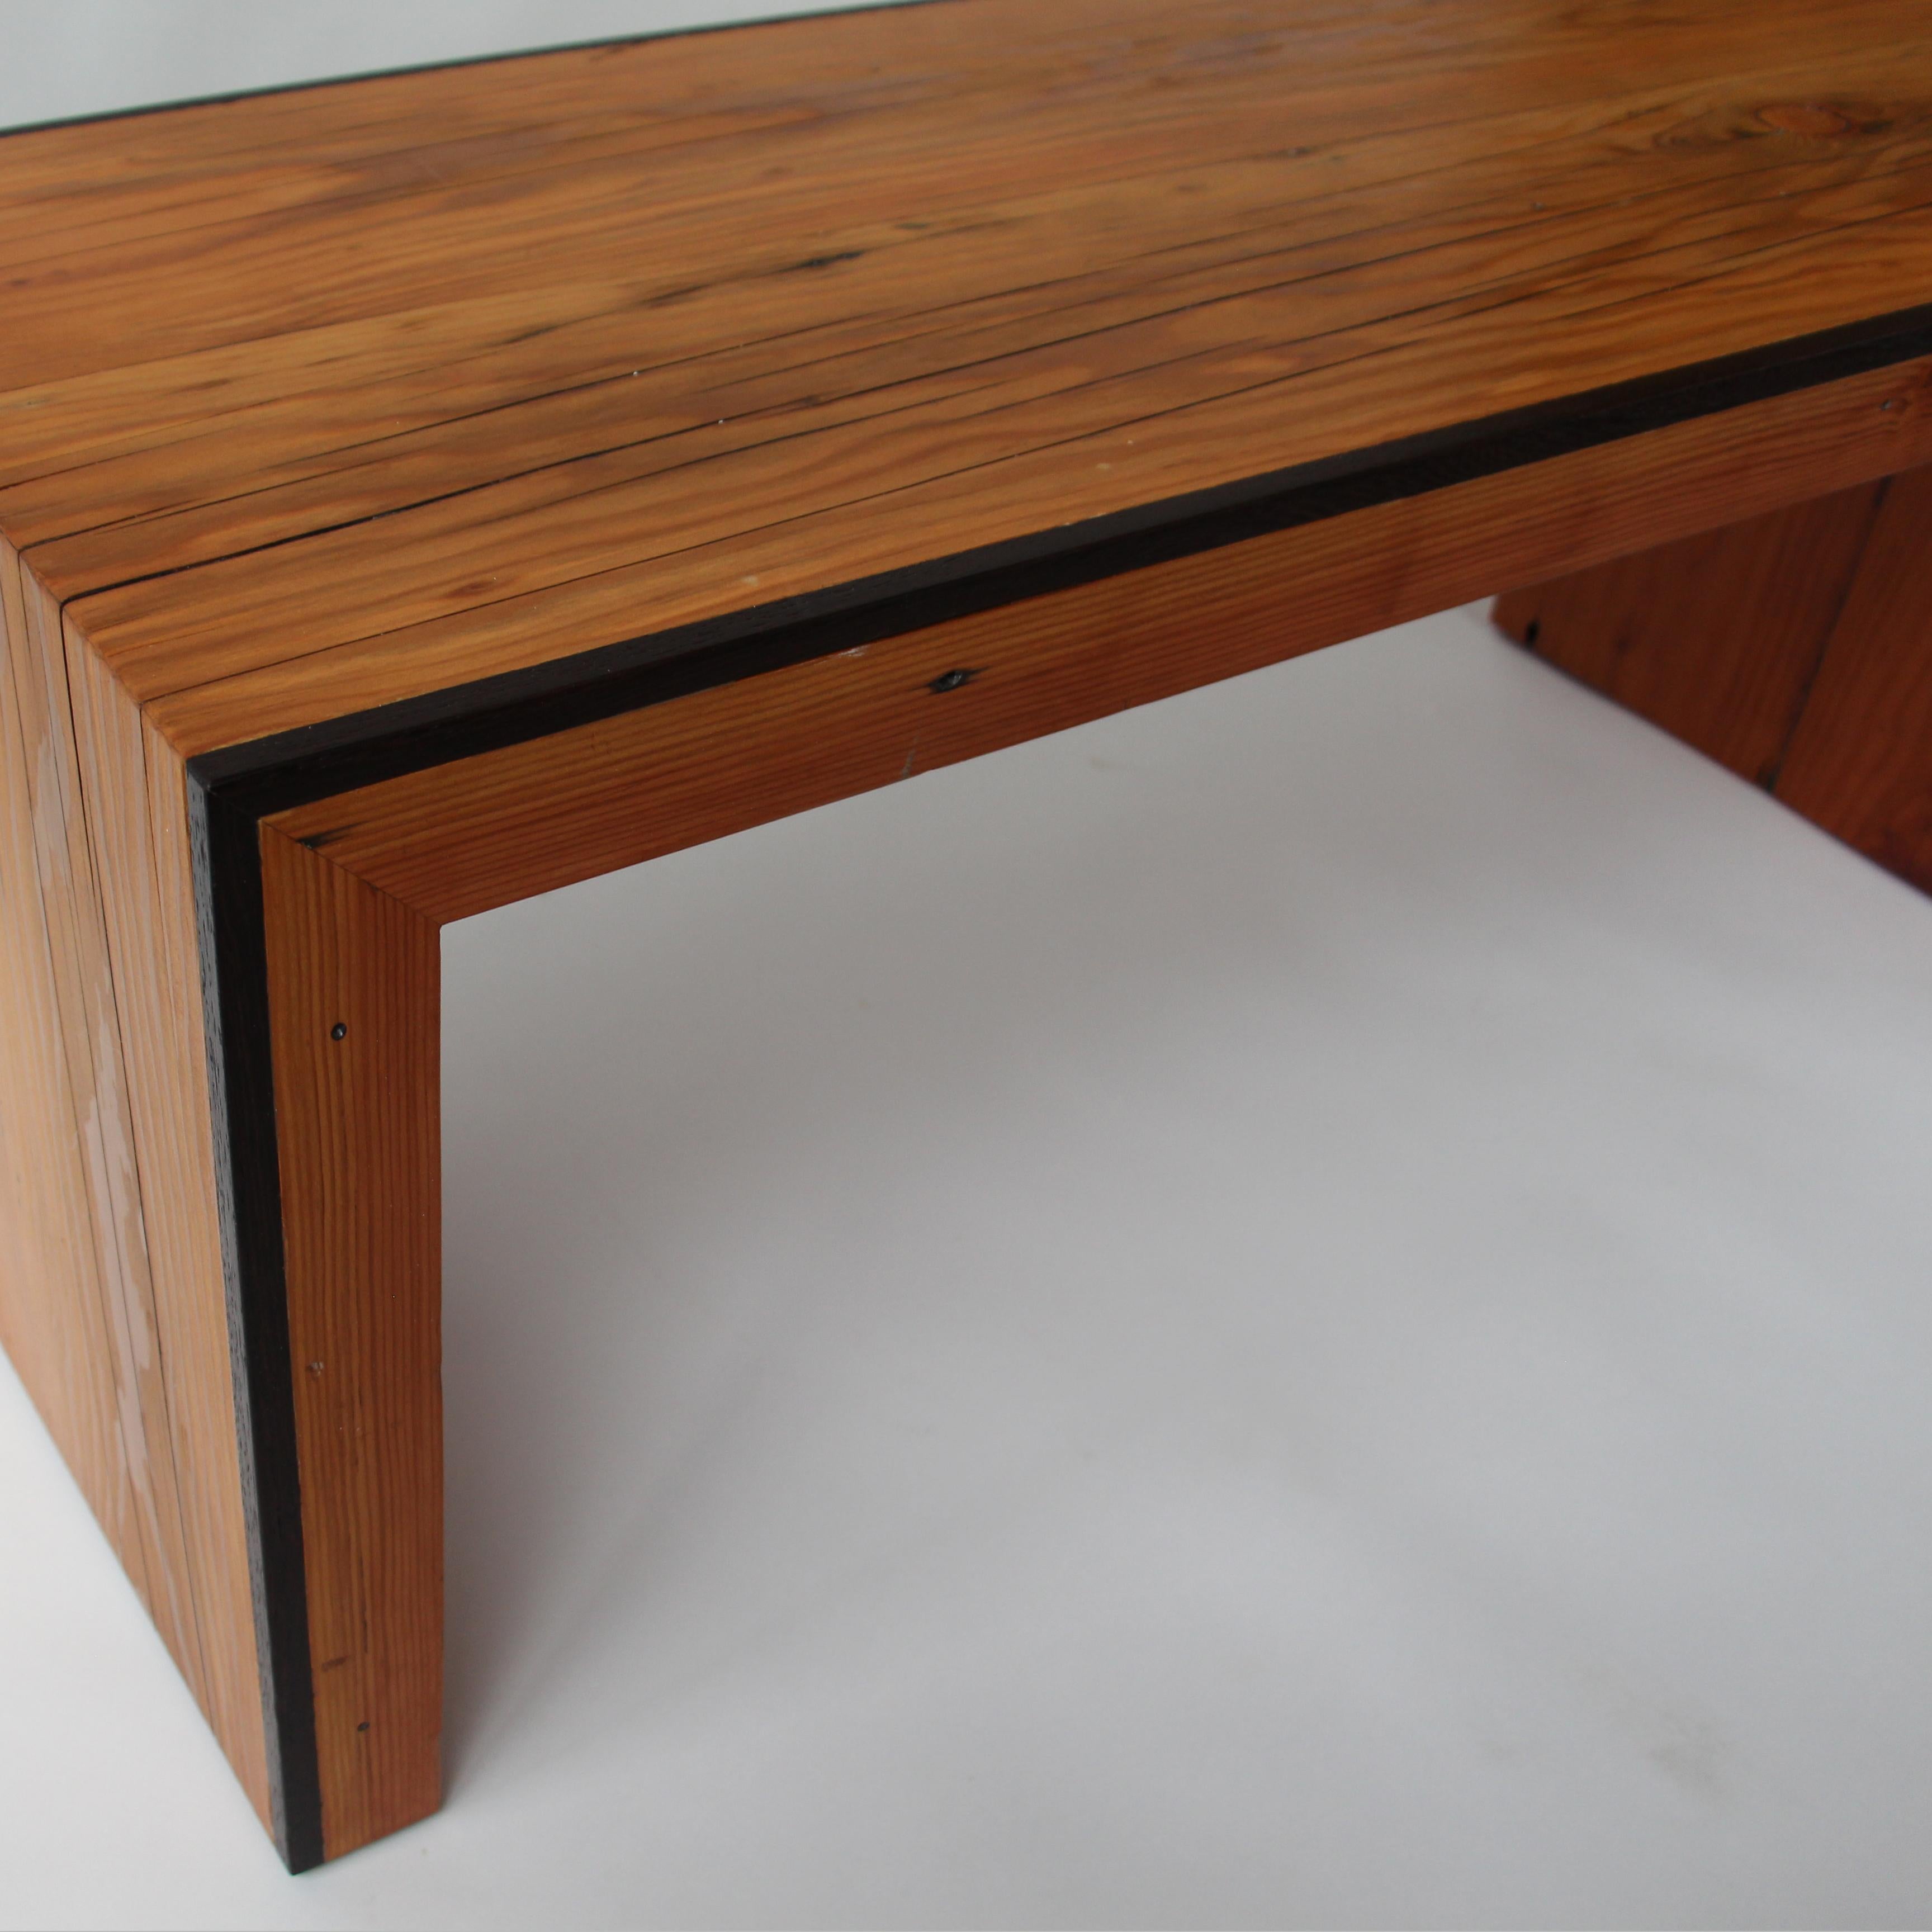 Monster Island Coffee Table Bench in Reclaimed Fir, Edged in Wengue - in stock 1